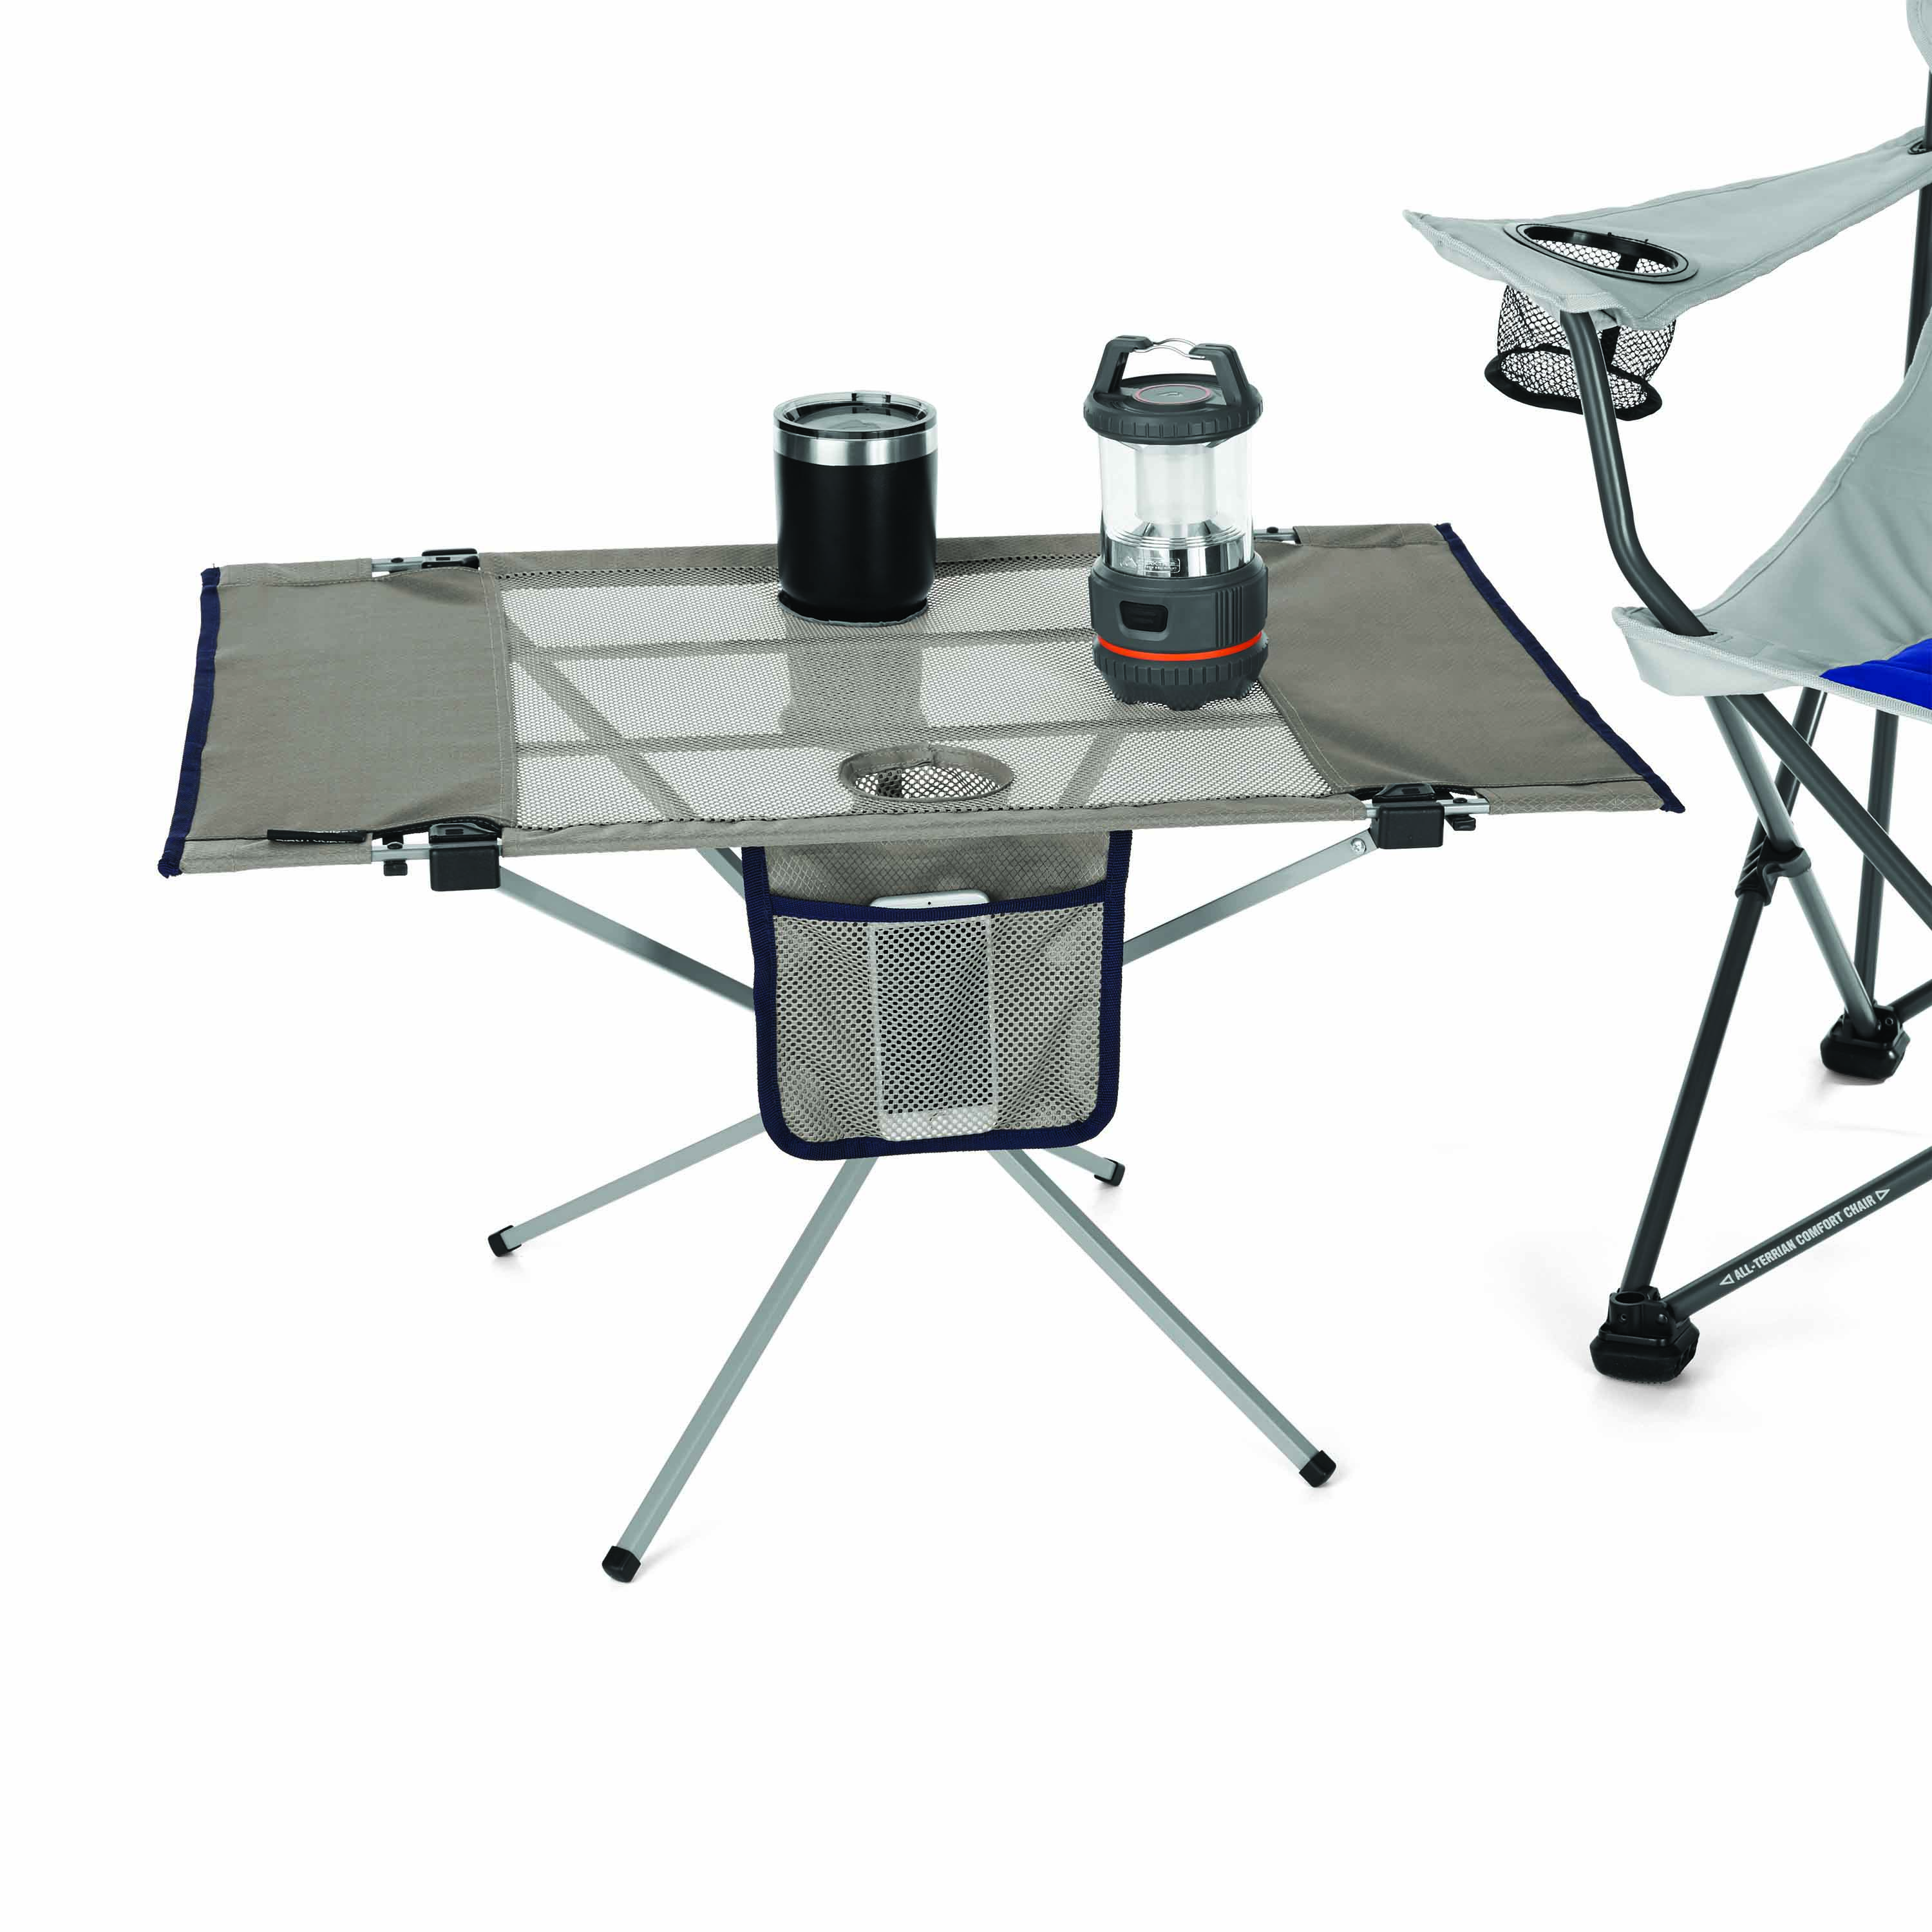 portable camping table folding coffee dining nic outdoor side ozark trail large drummer stool with backrest ikea fabric storage pottery barn wood desk tall narrow entryway address